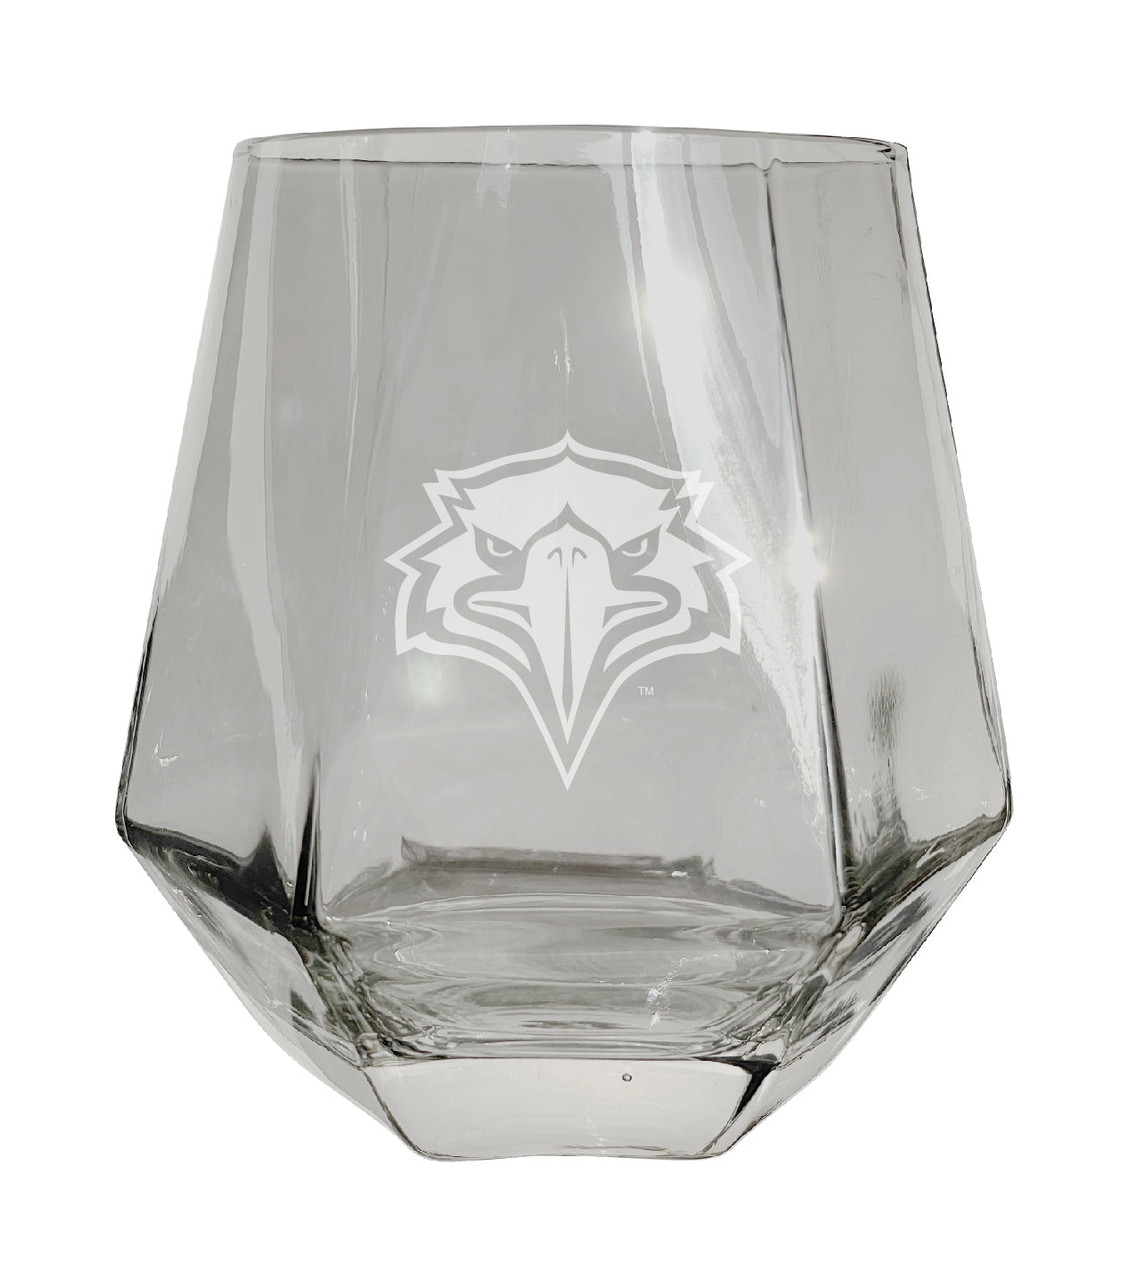 Morehead State University Etched Diamond Cut Stemless 10 ounce Wine Glass Clear